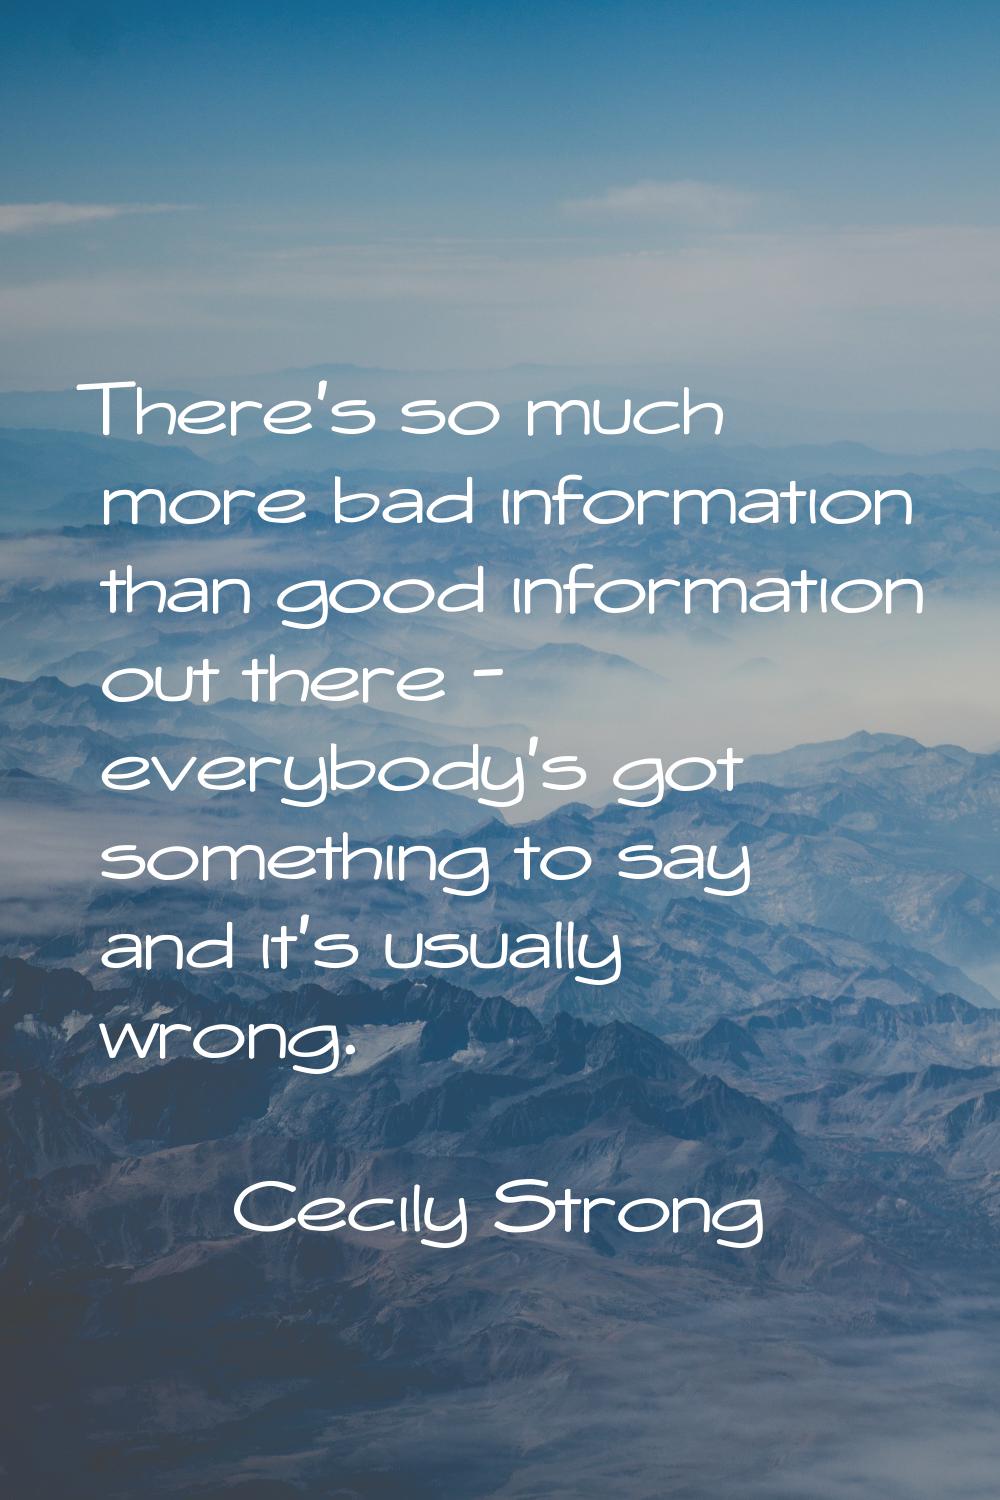 There's so much more bad information than good information out there - everybody's got something to